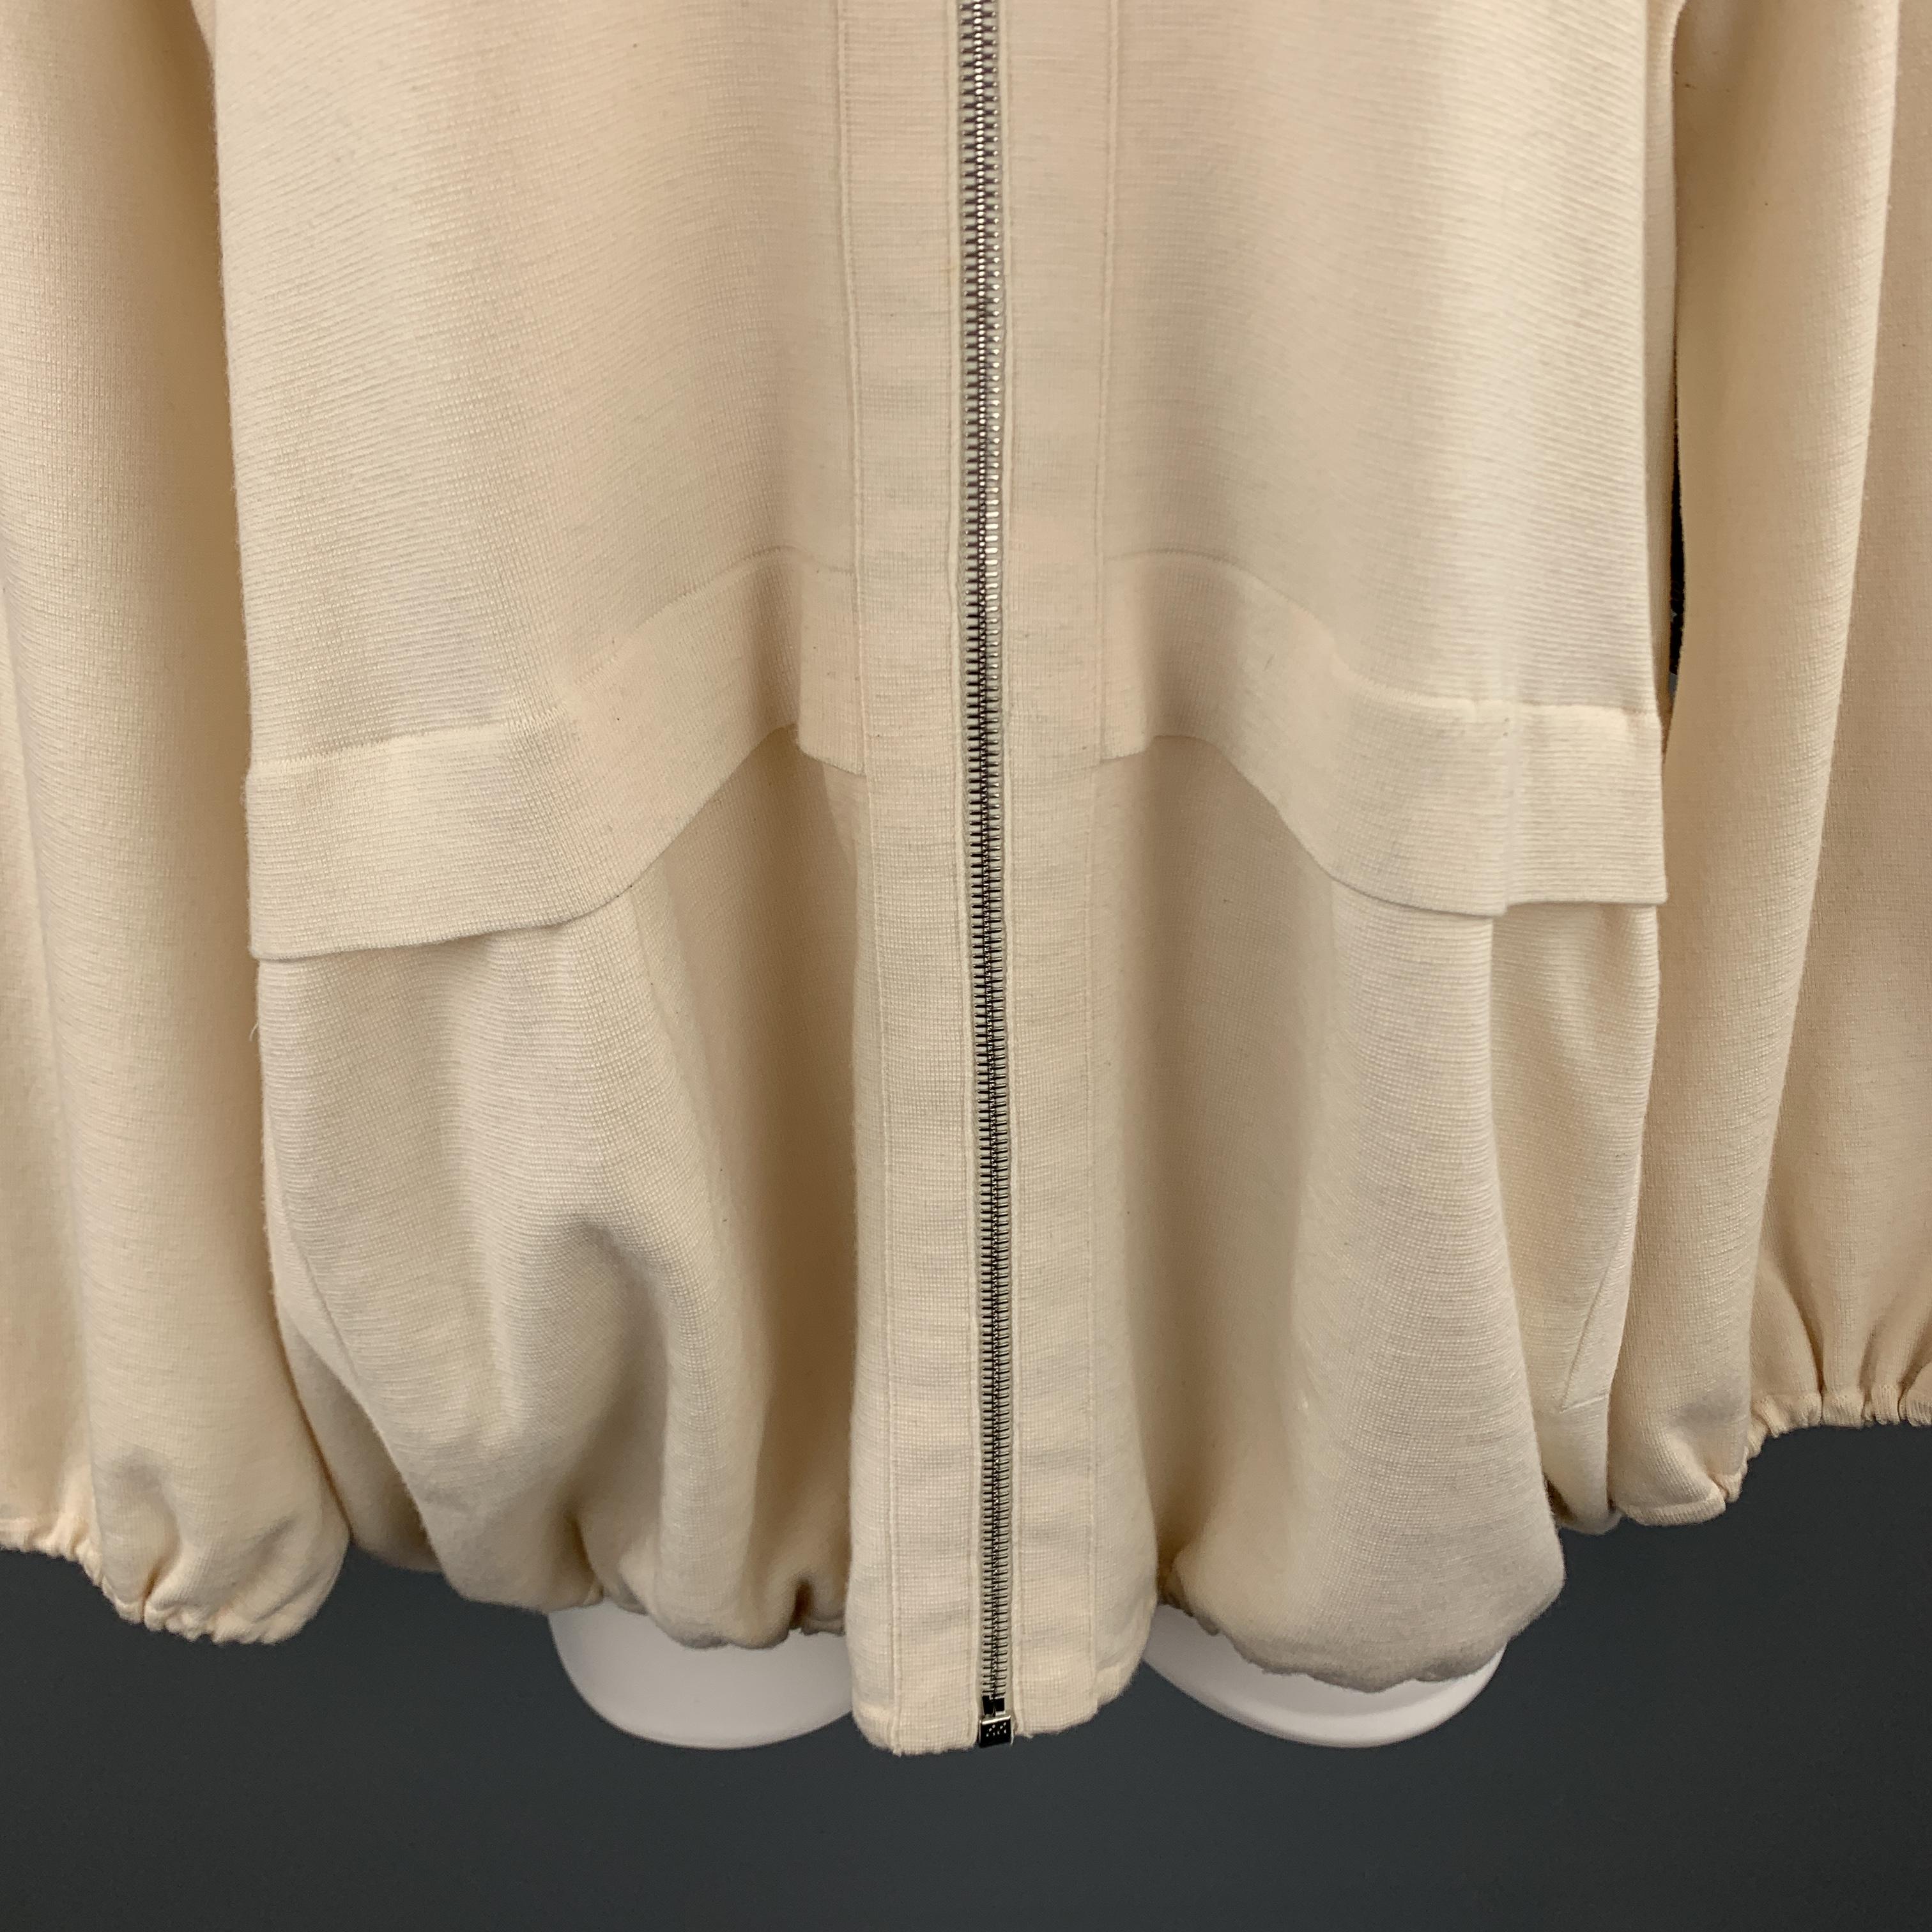 AKRIS sweater jacket comes in cream wool blend knit with a high neck, zip front, and elastic drawstring hems. Wear on front. As-is. 

Good Pre-Owned Condition.
Marked: US 14

Measurements:

Shoulder: 17.5 in.
Bust: 44 in.
Sleeve: 24 in.
Length: 28